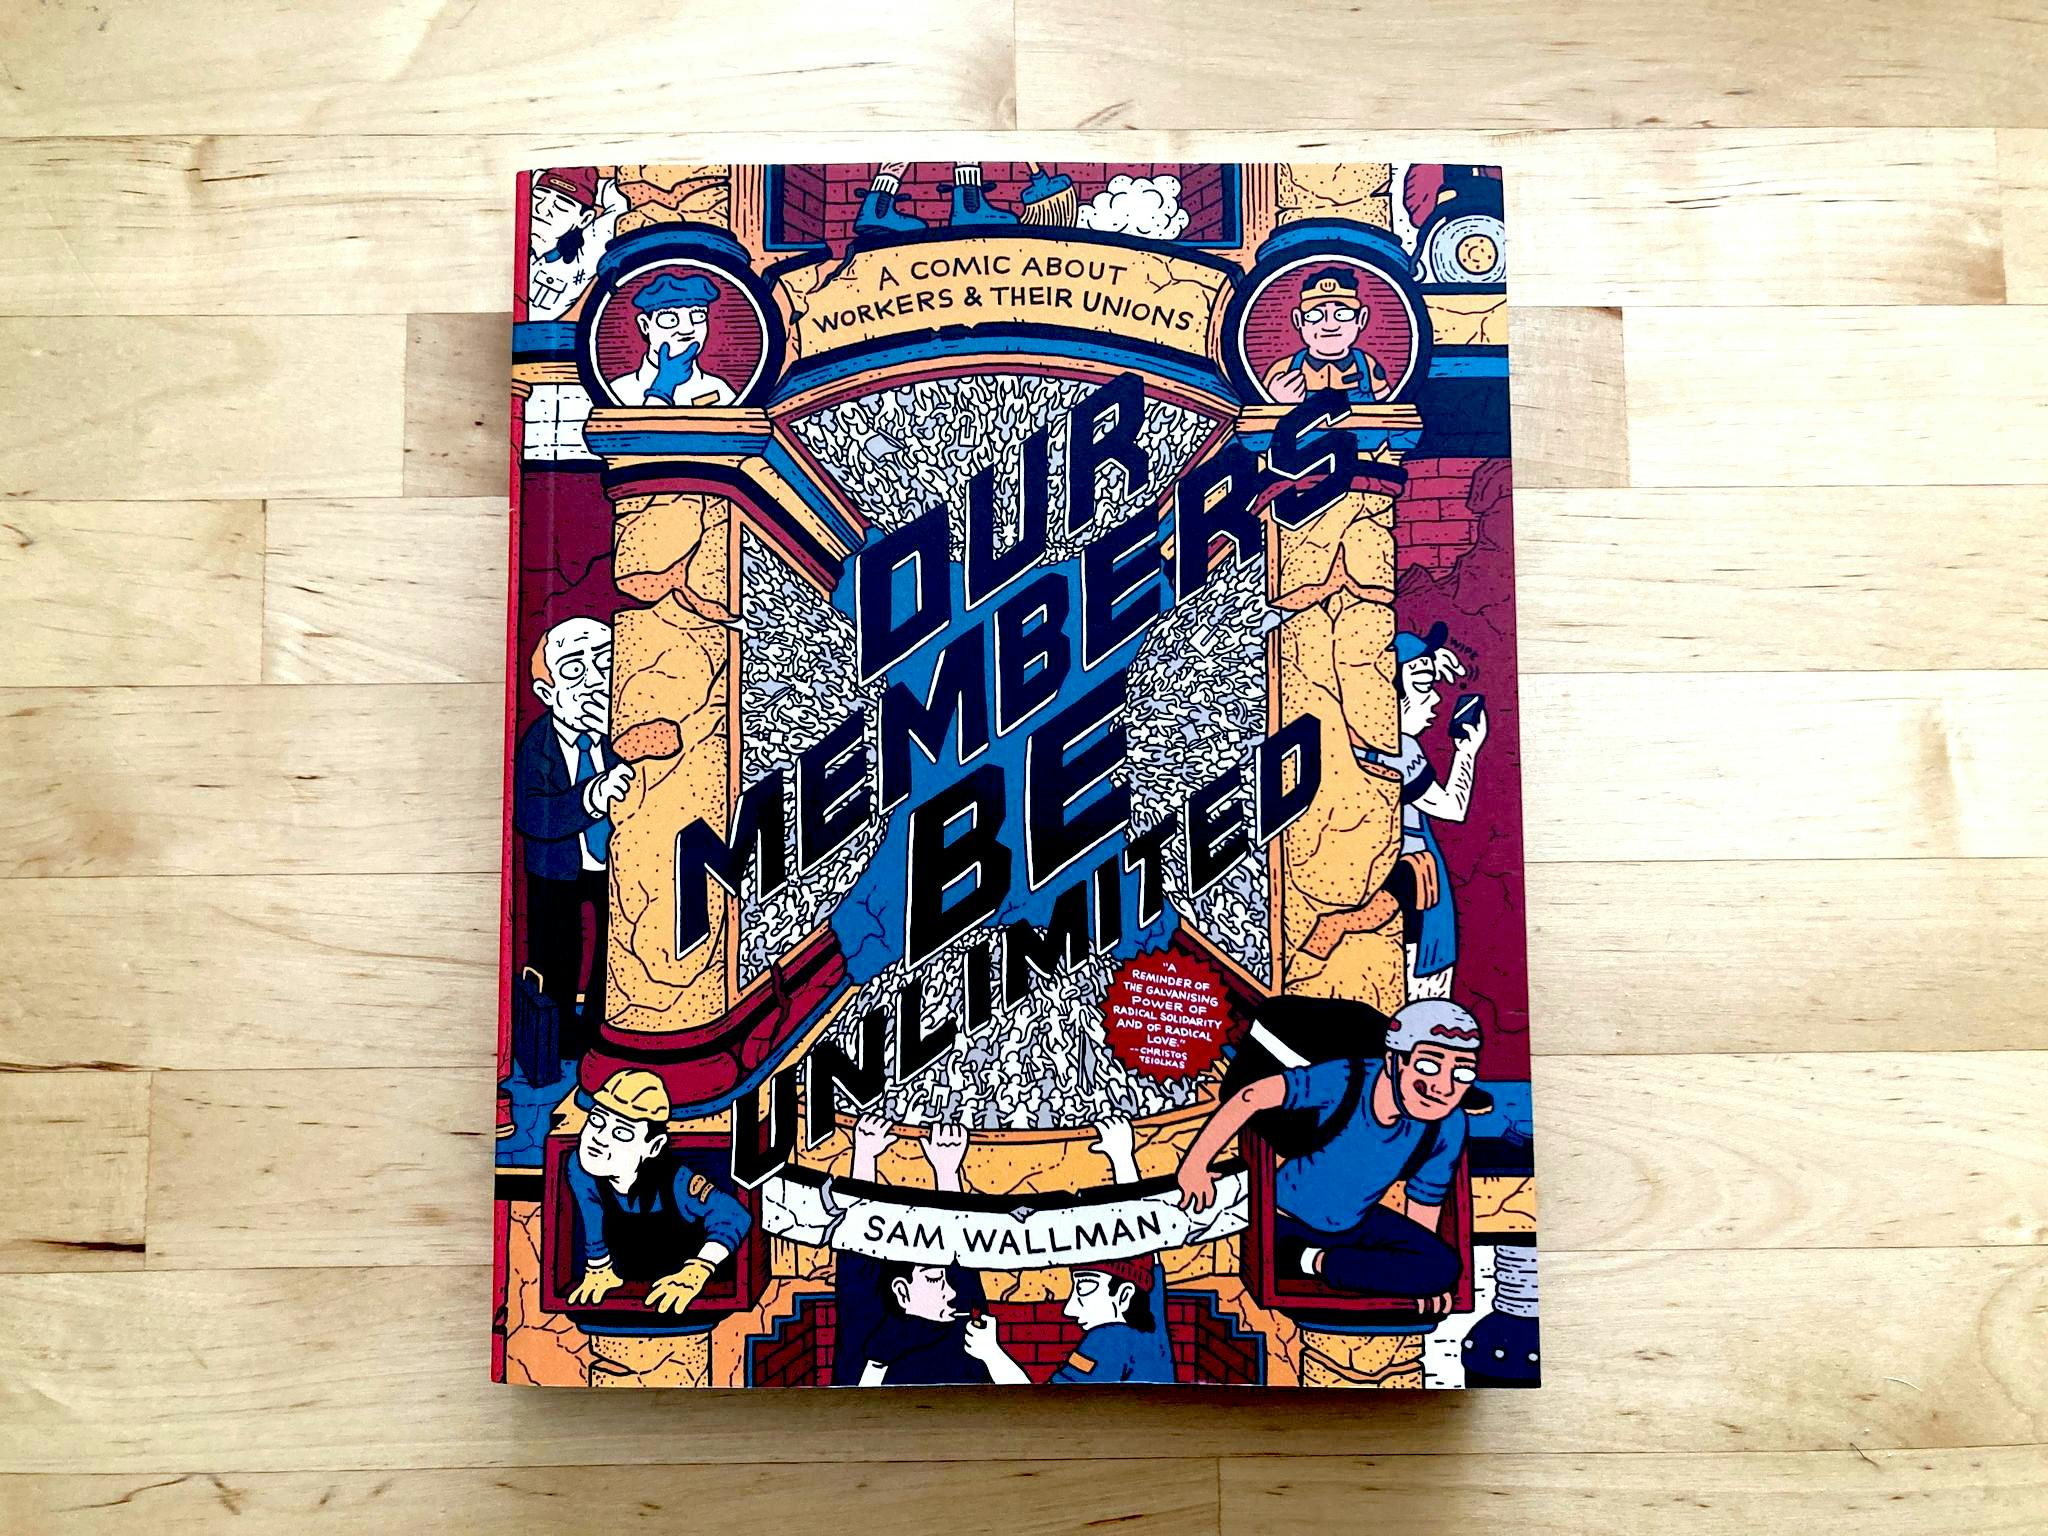 Review: ‘Our Members Be Unlimited: A Comic Book about Workers and Their Unions’